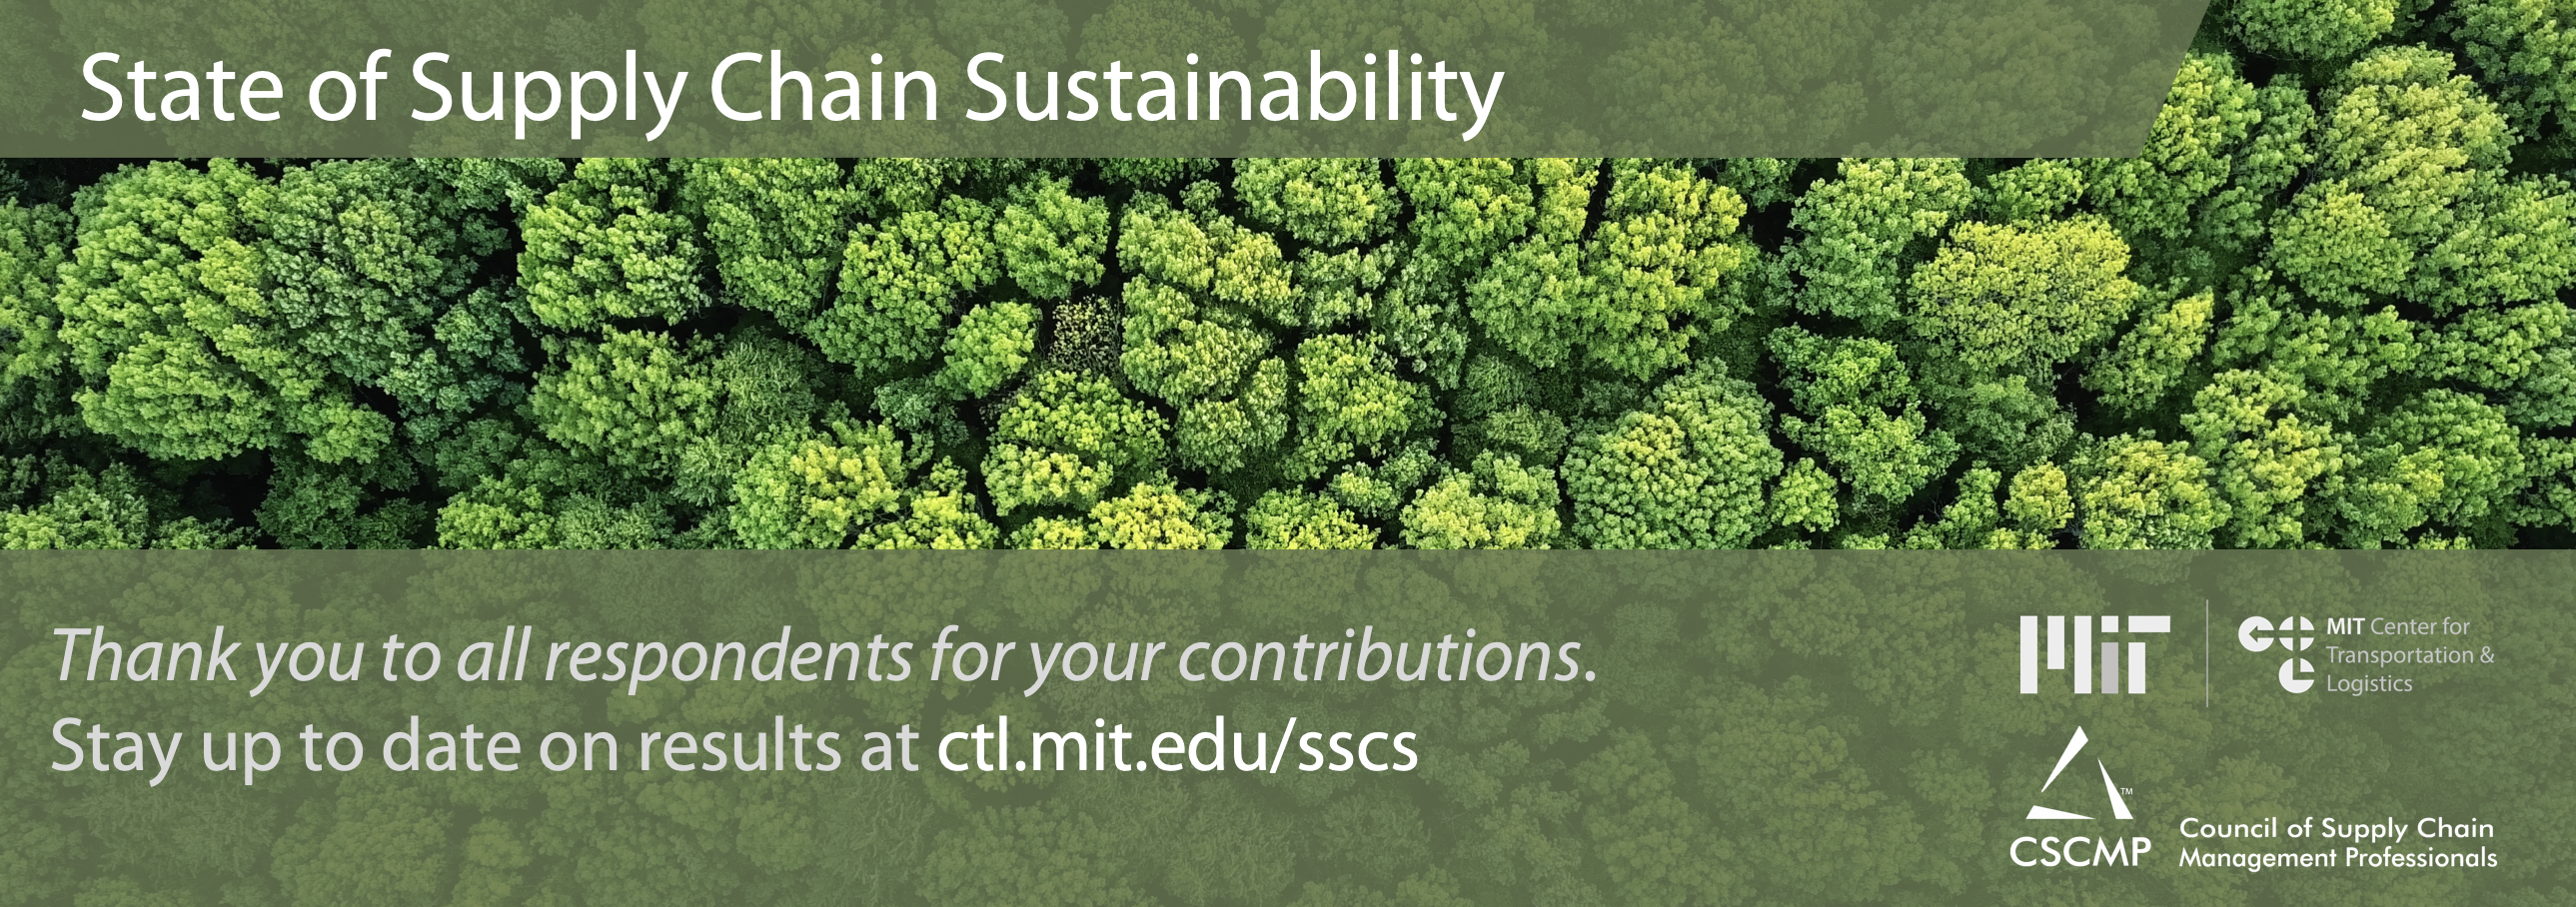 State supply chain sustainability banner